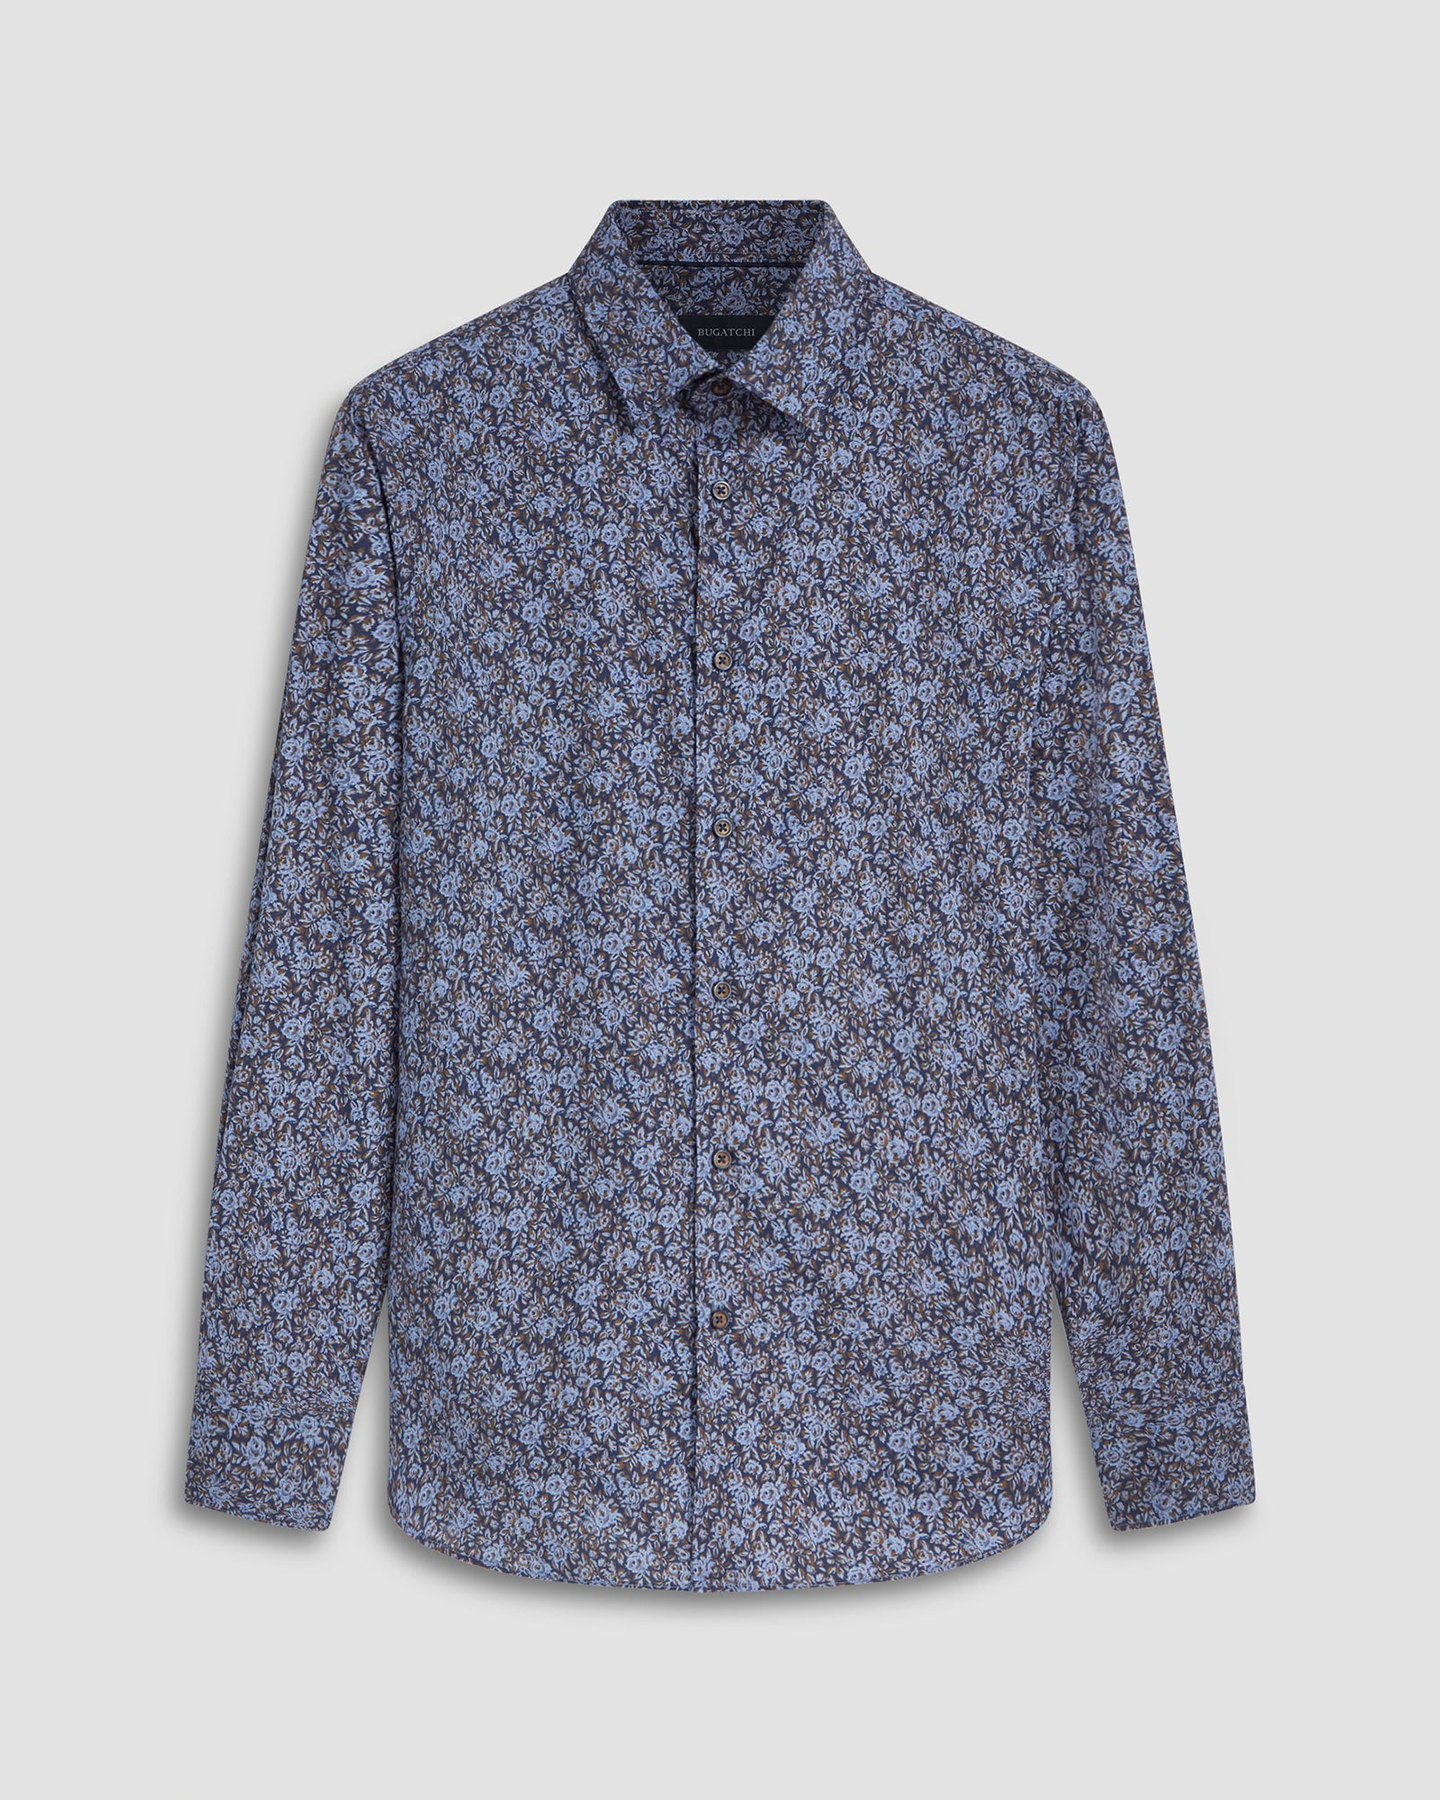 COMFORT STRETCH MIDNIGHT ROSE PRINT SHAPED FIT SHIRT - NAVY